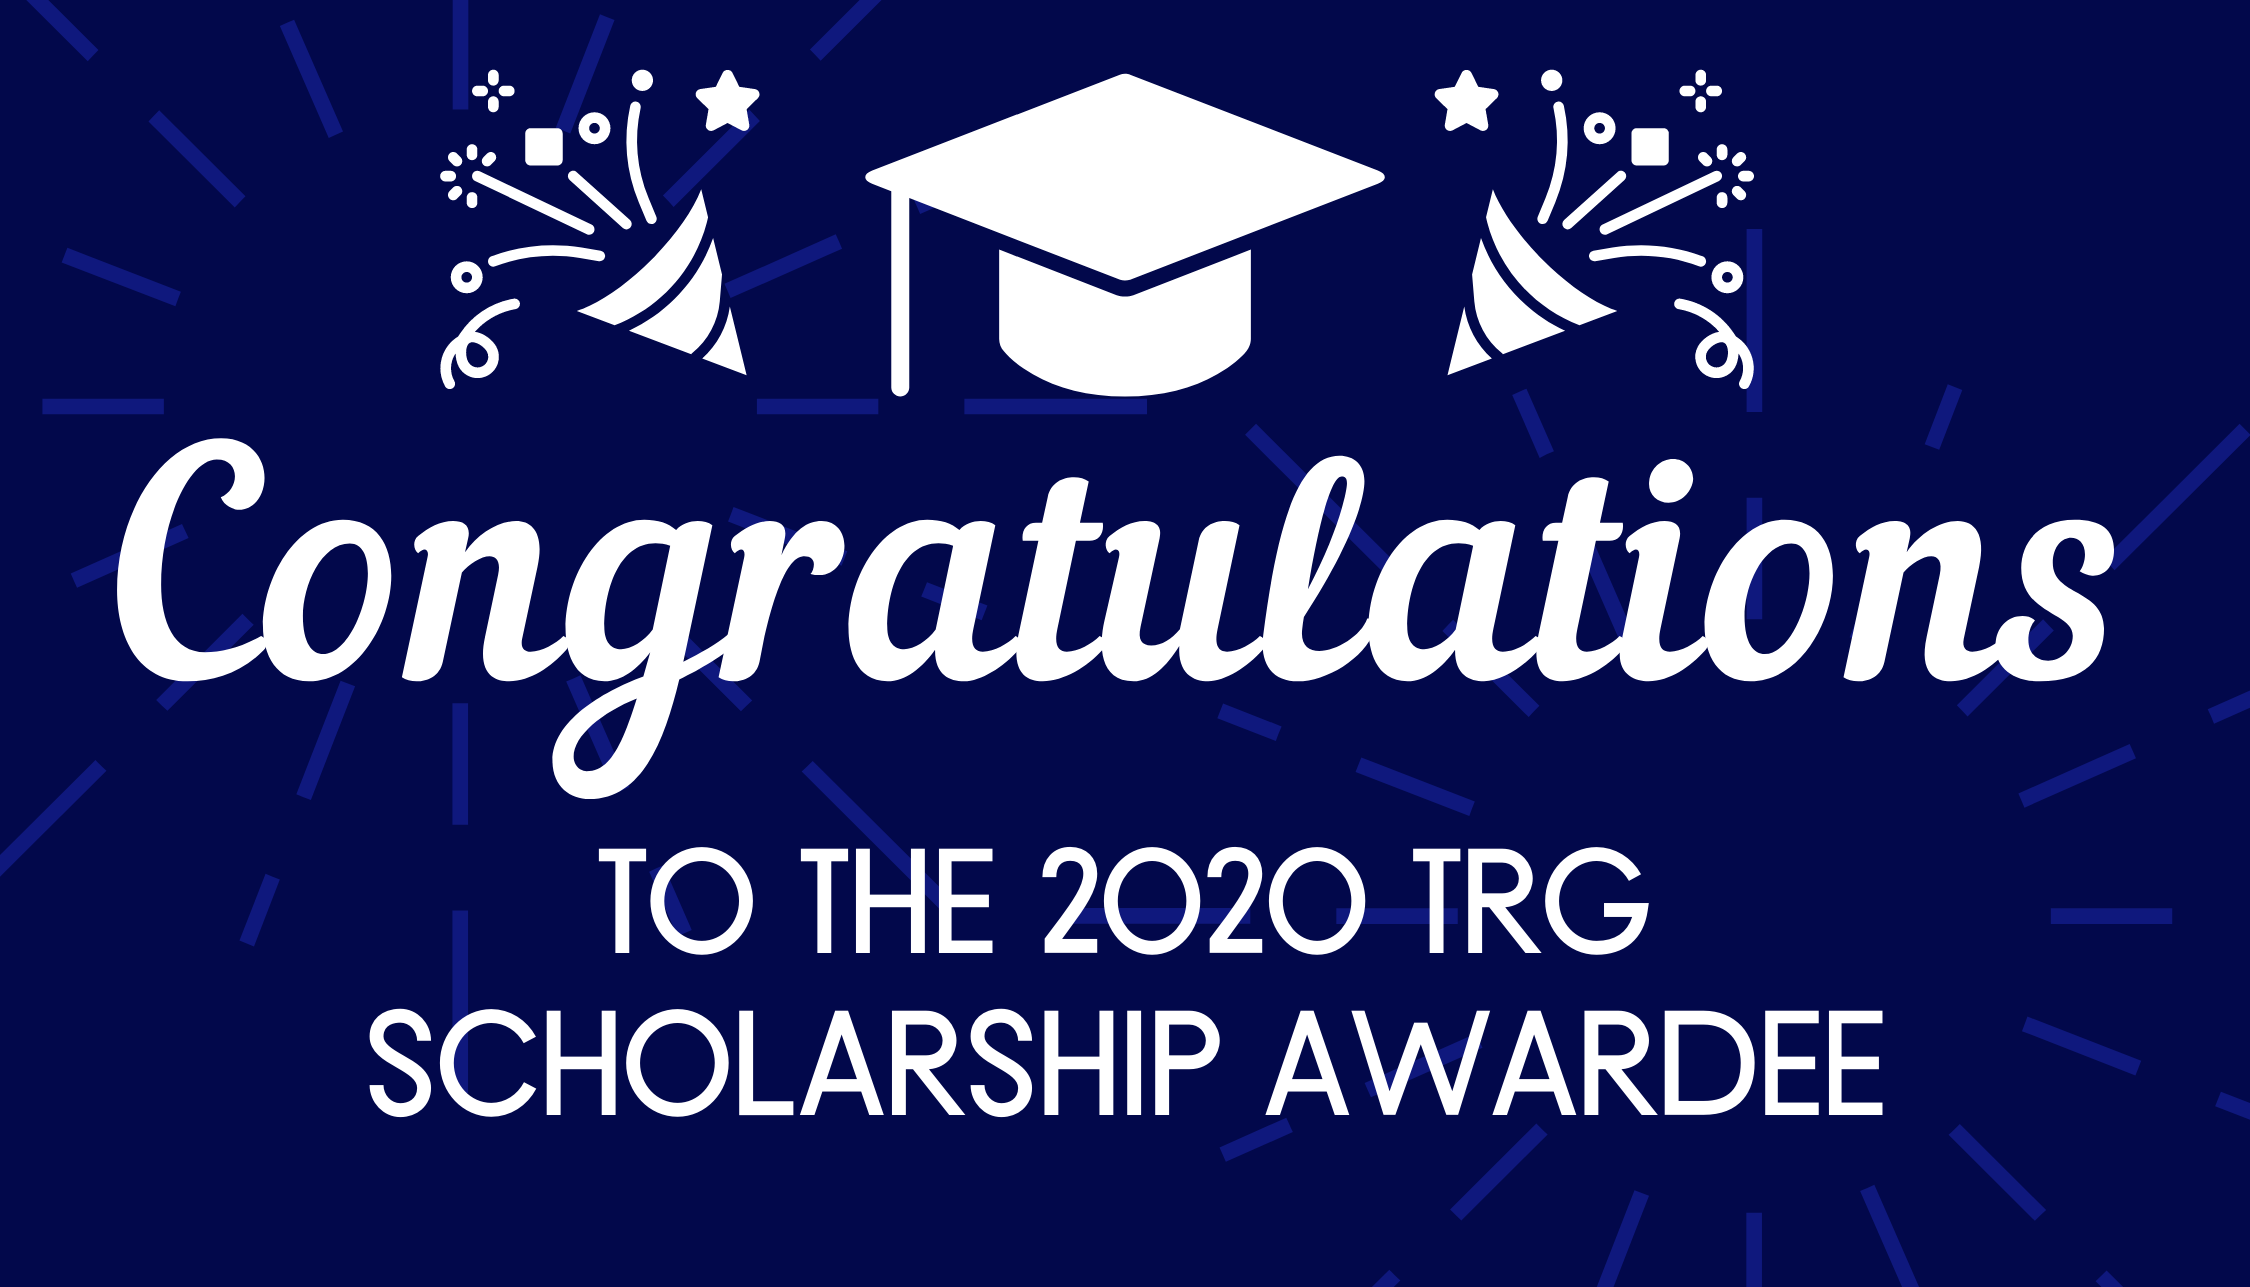 Congratulations to the 2020 TRG Scholarship Awardee